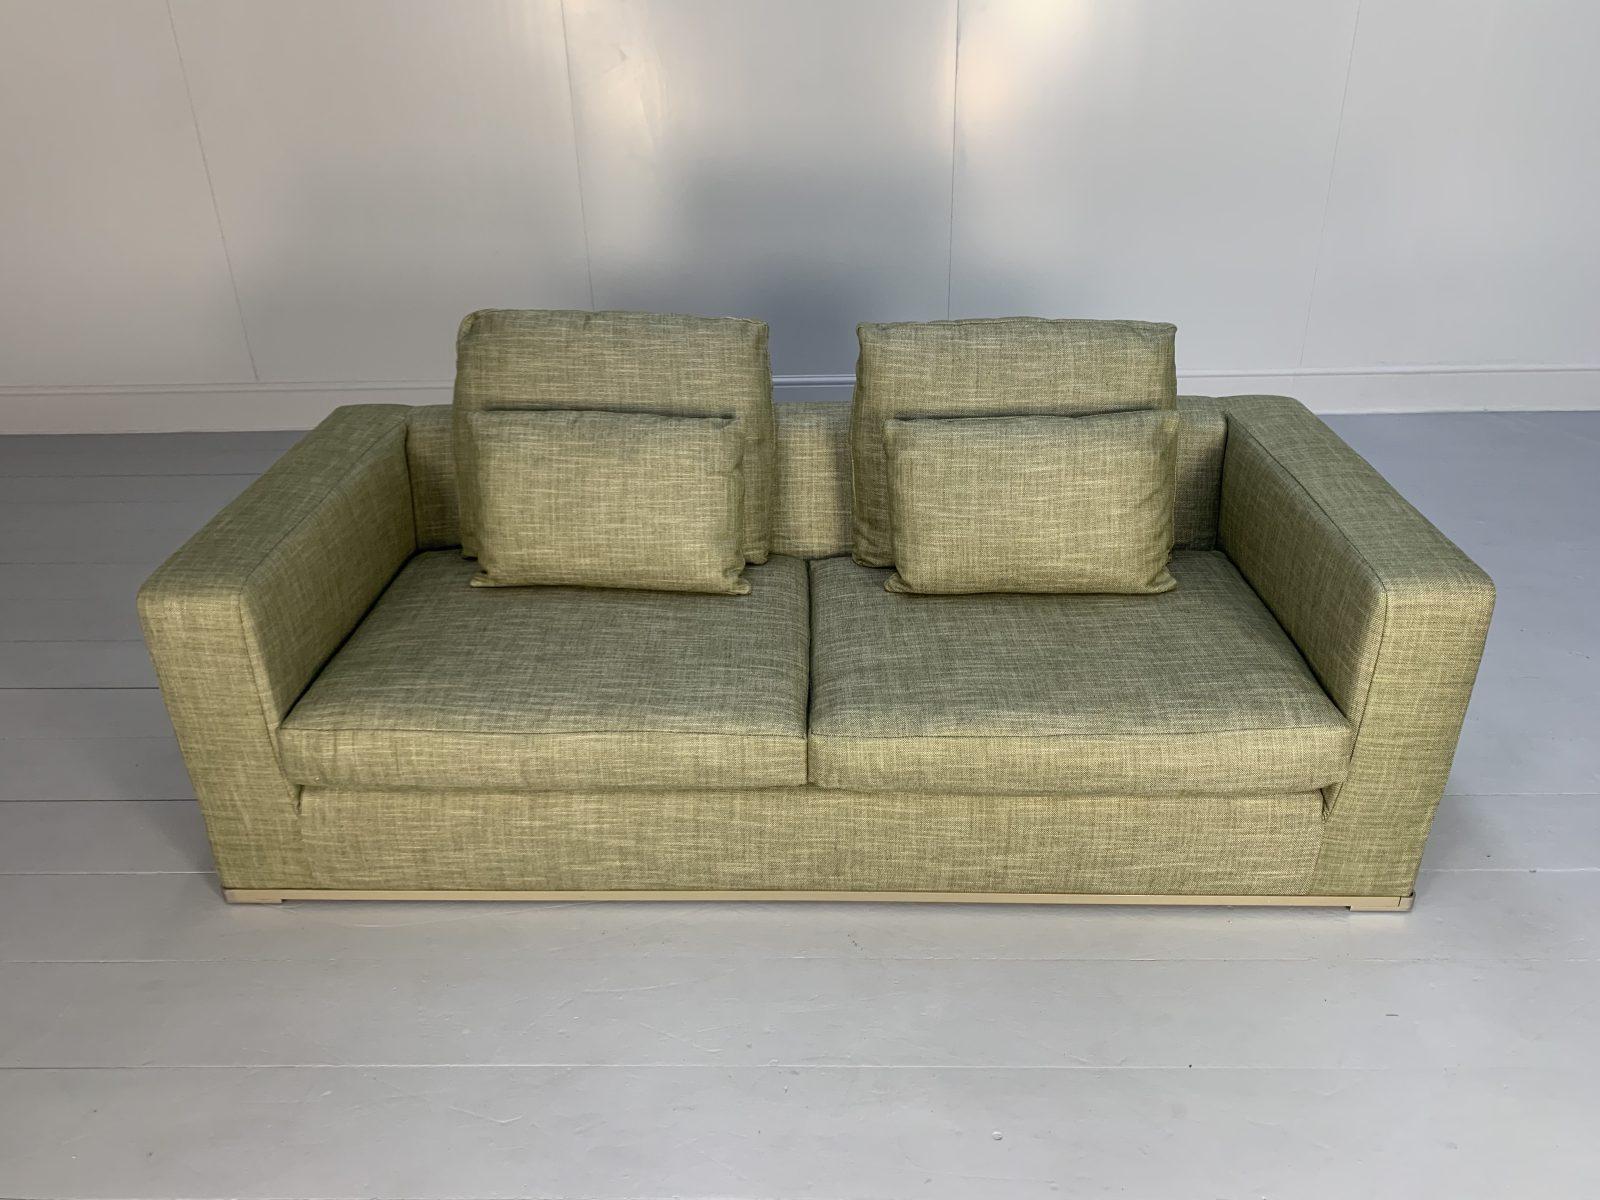 Pair of B&B Italia “Omnia” Sofas, 2.5-Seat, in Pale Green Linen For Sale 4